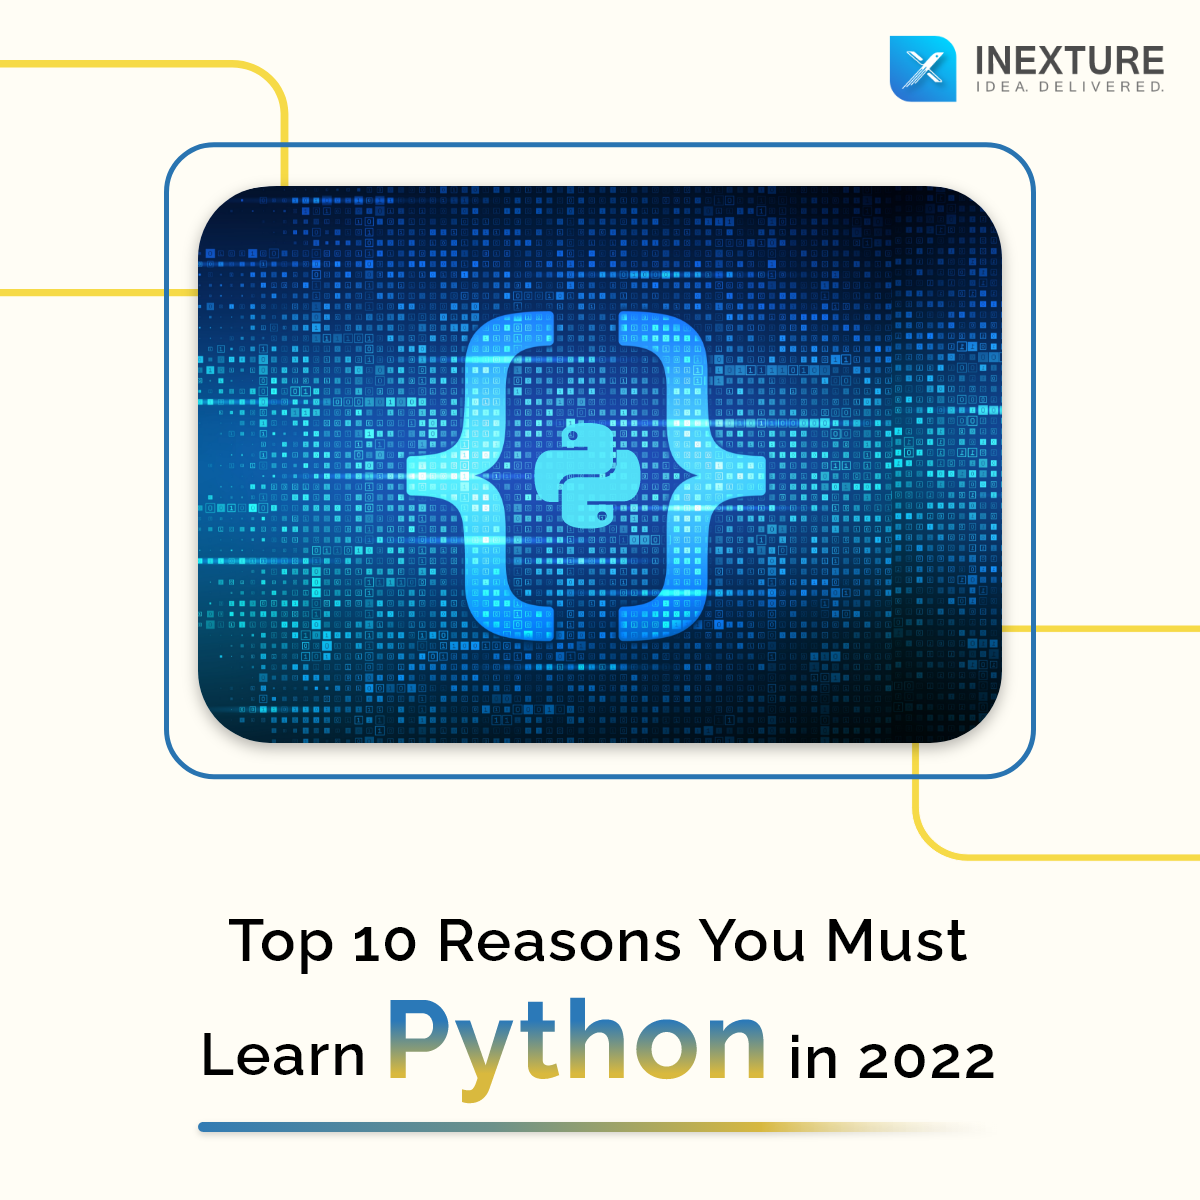 Top 10 Reasons You Must Learn Python in 2022